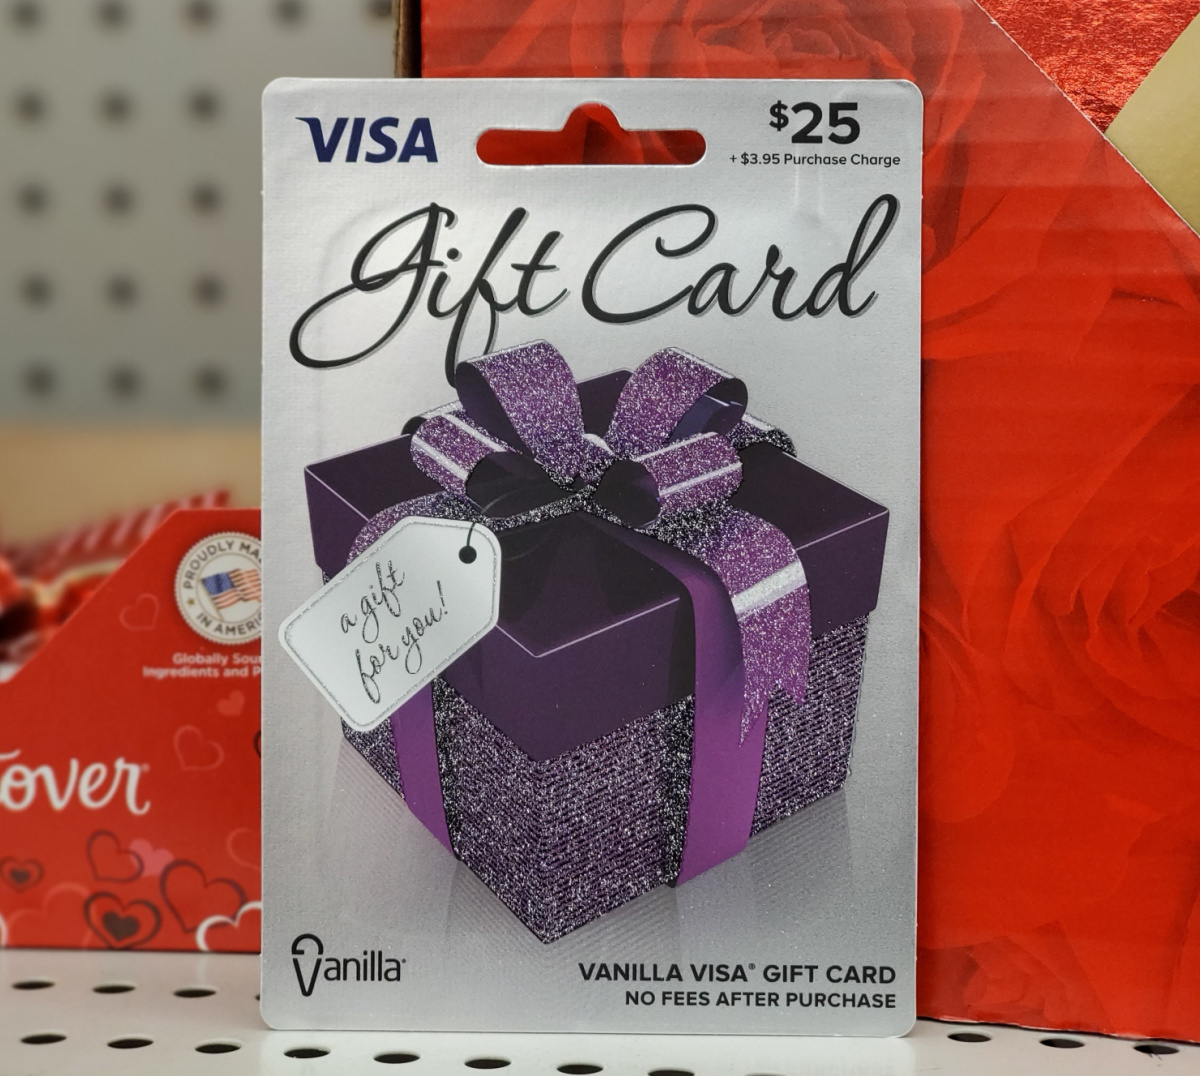 Can You Trade Gift Cards for Cash? | MoneyLion